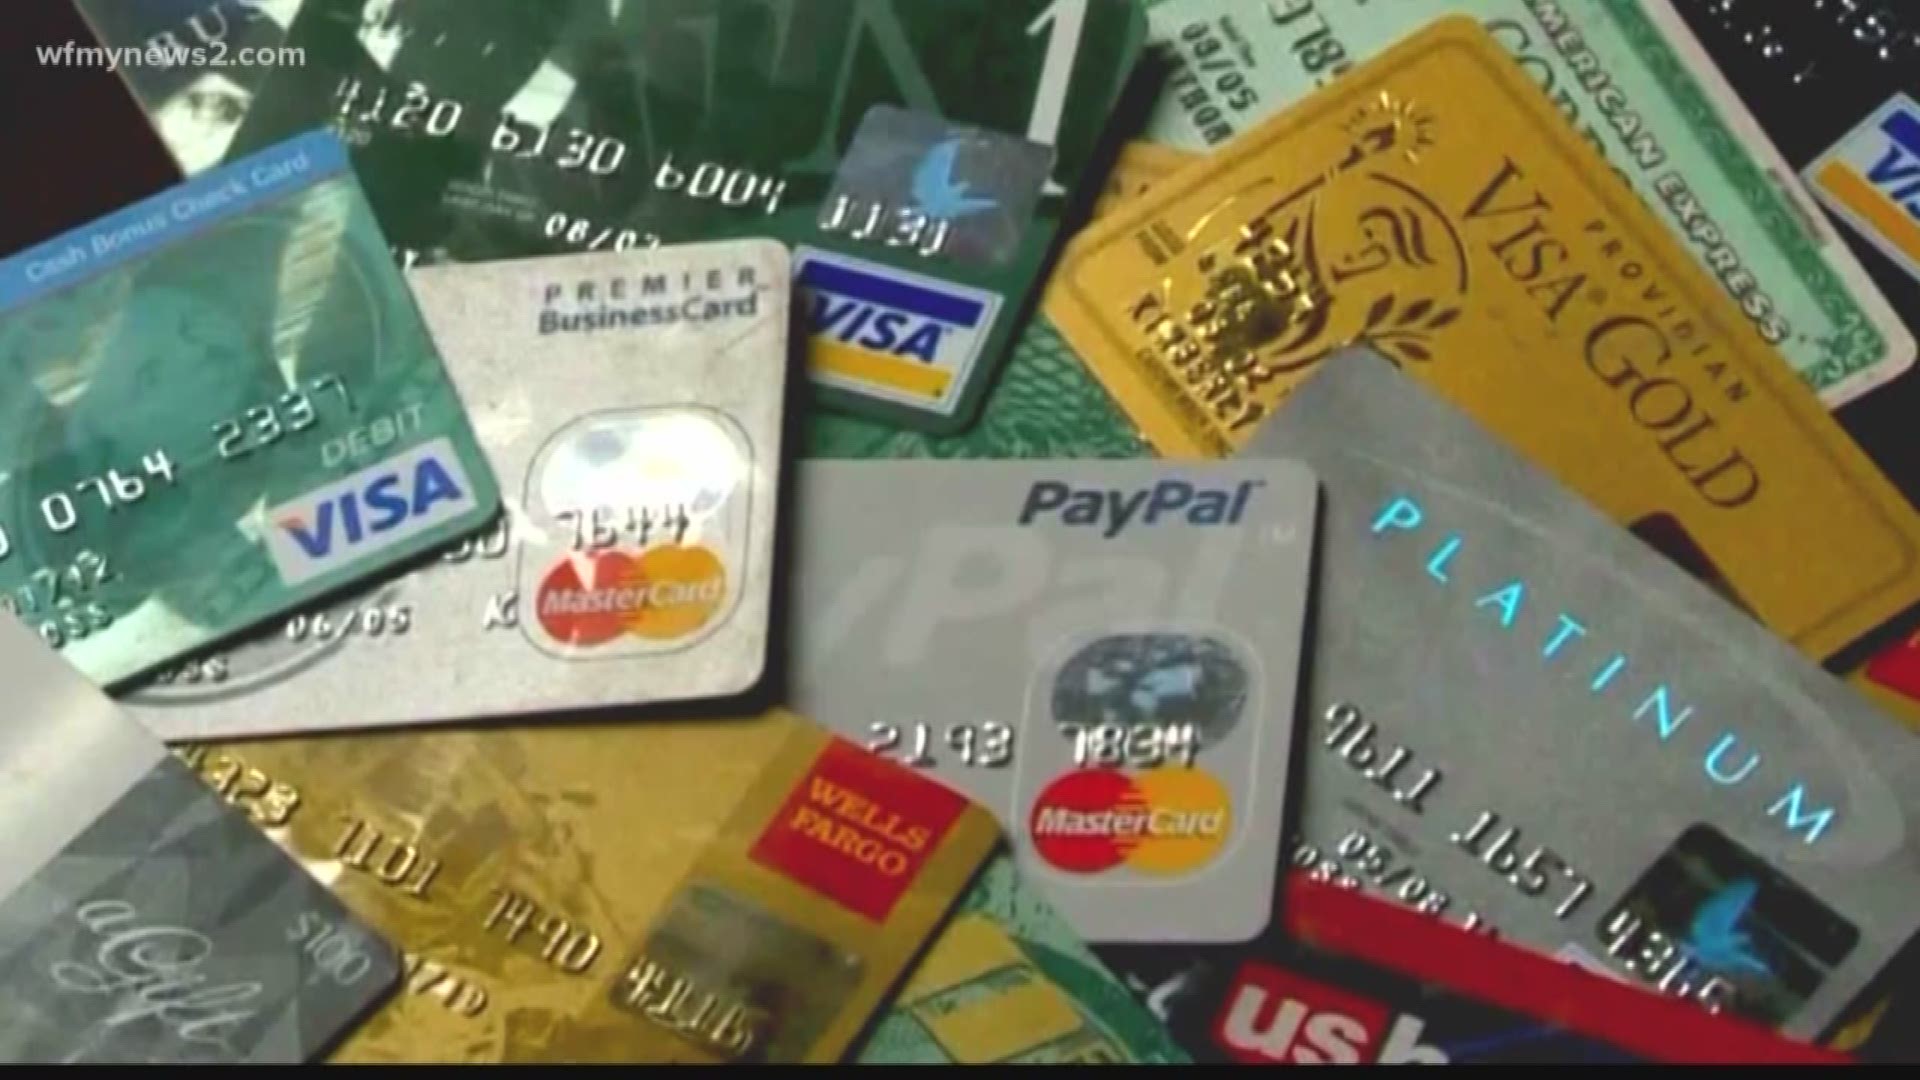 Several reports of card skimming have been roaming around social media across the Triad